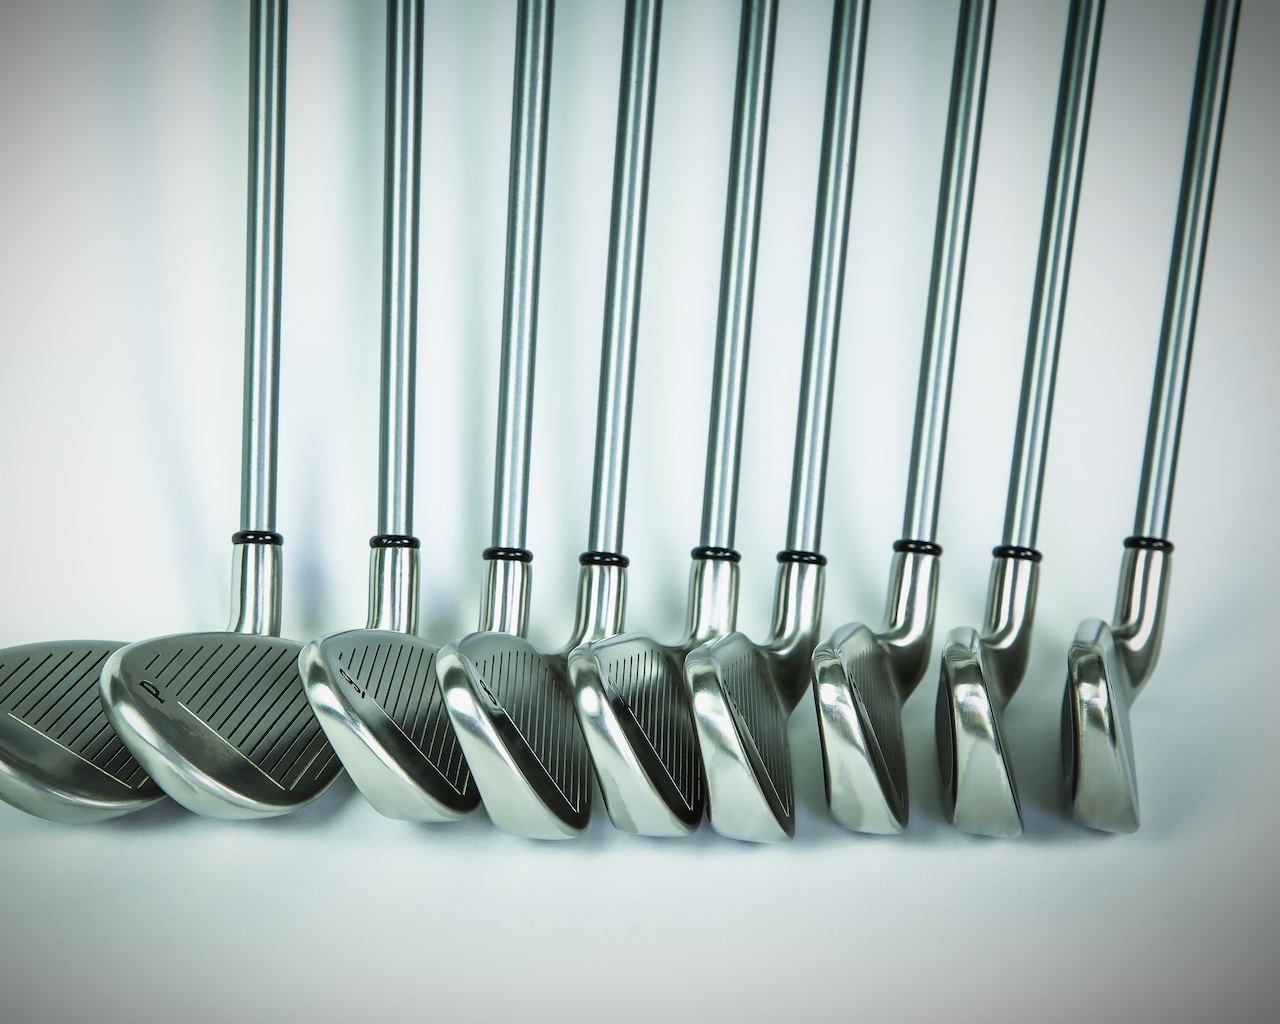 Golf clubs in row gray background